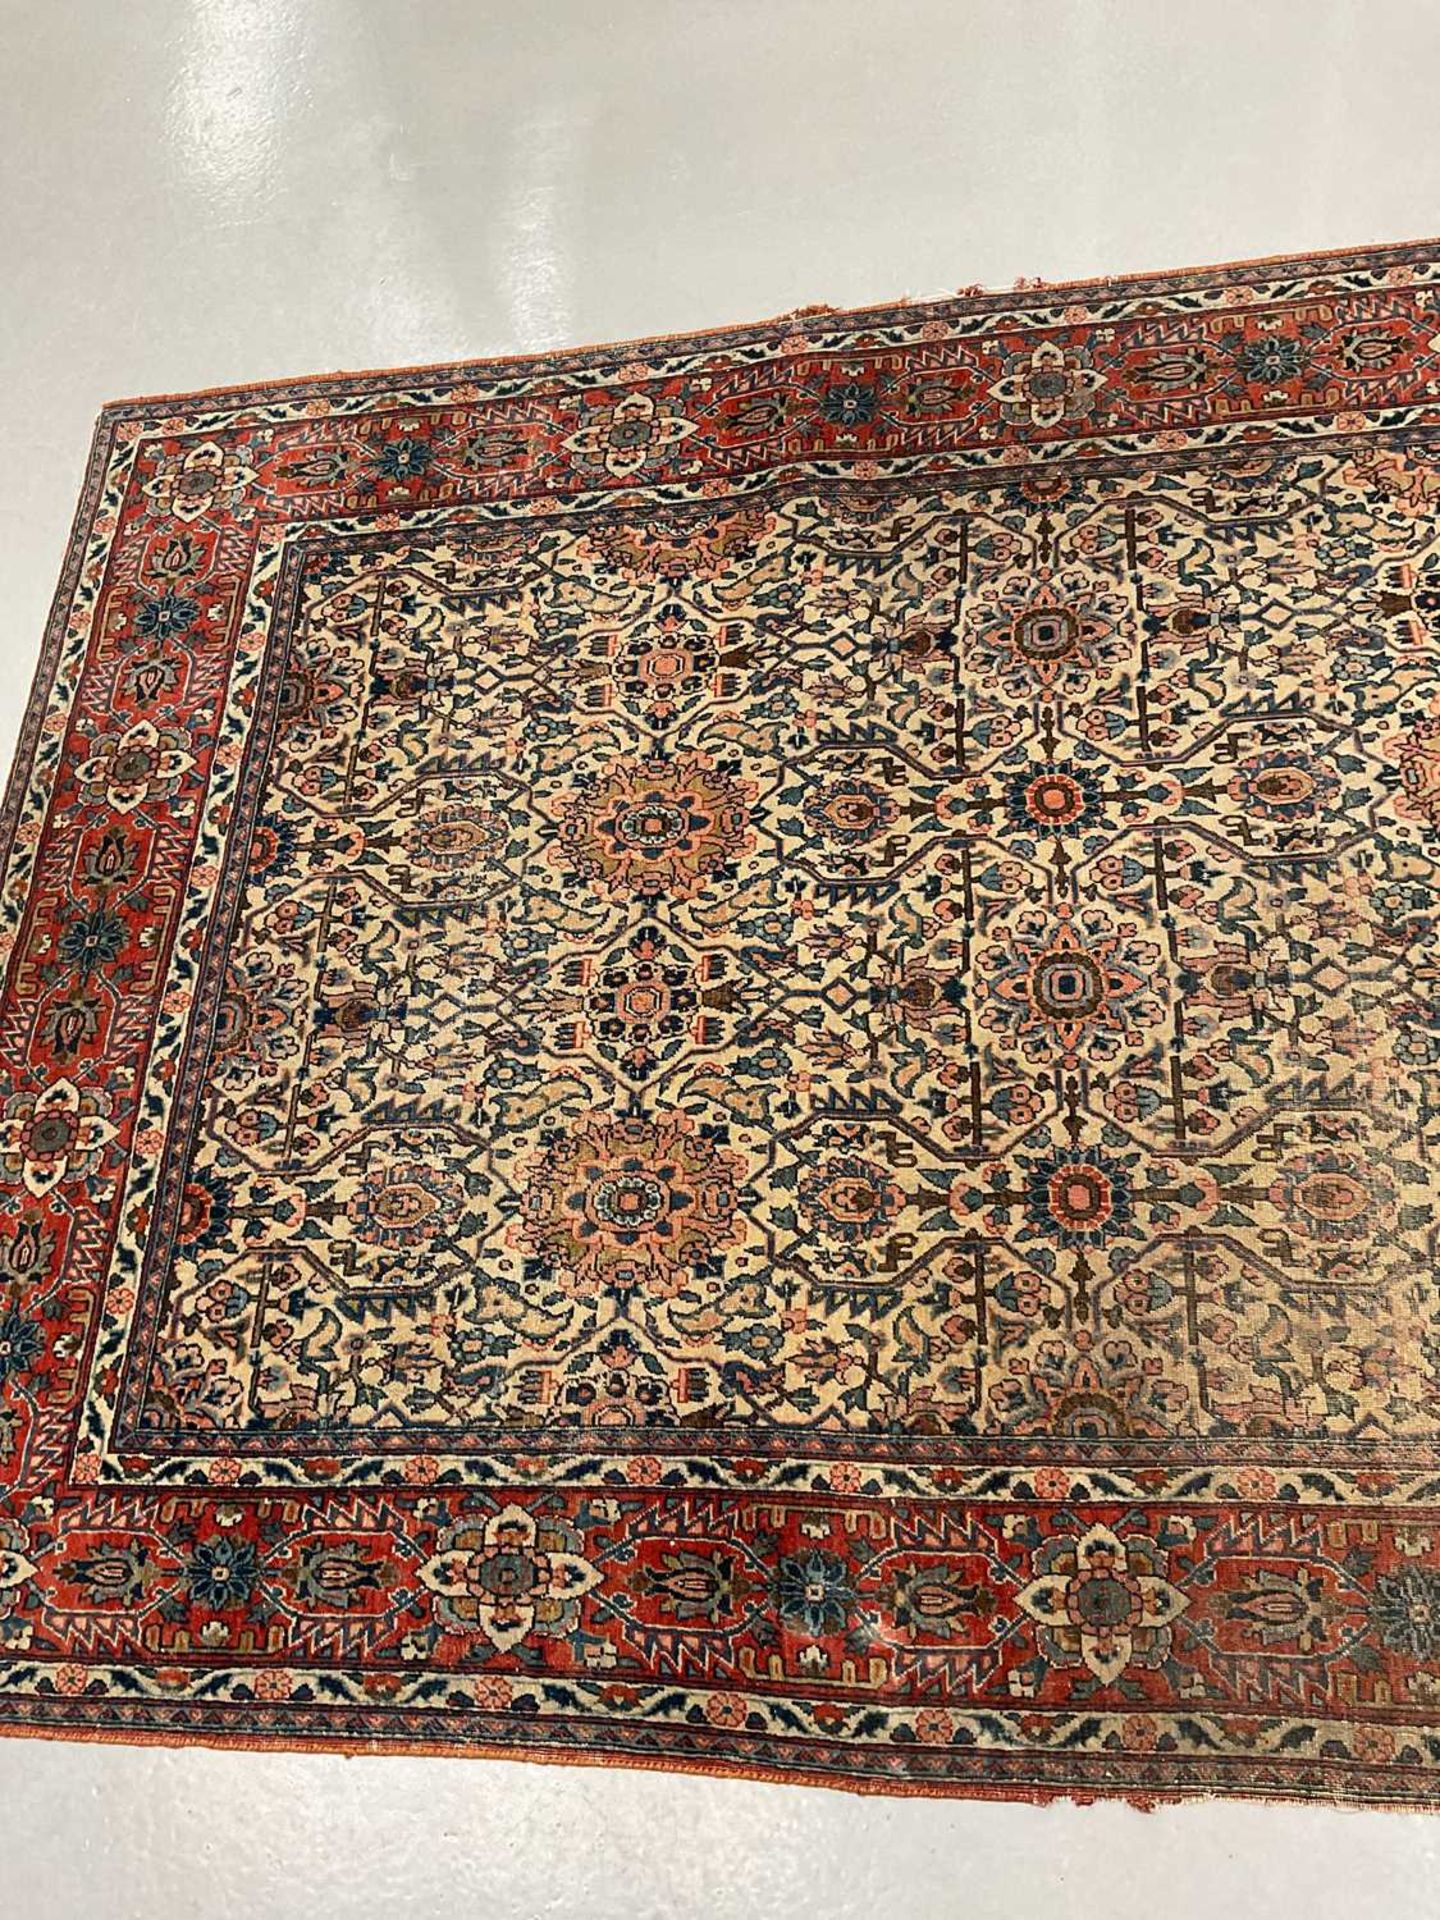 An antique ivory ground Kerman rug with an allover floral design within multiple borders 202 x 137cm - Image 6 of 10